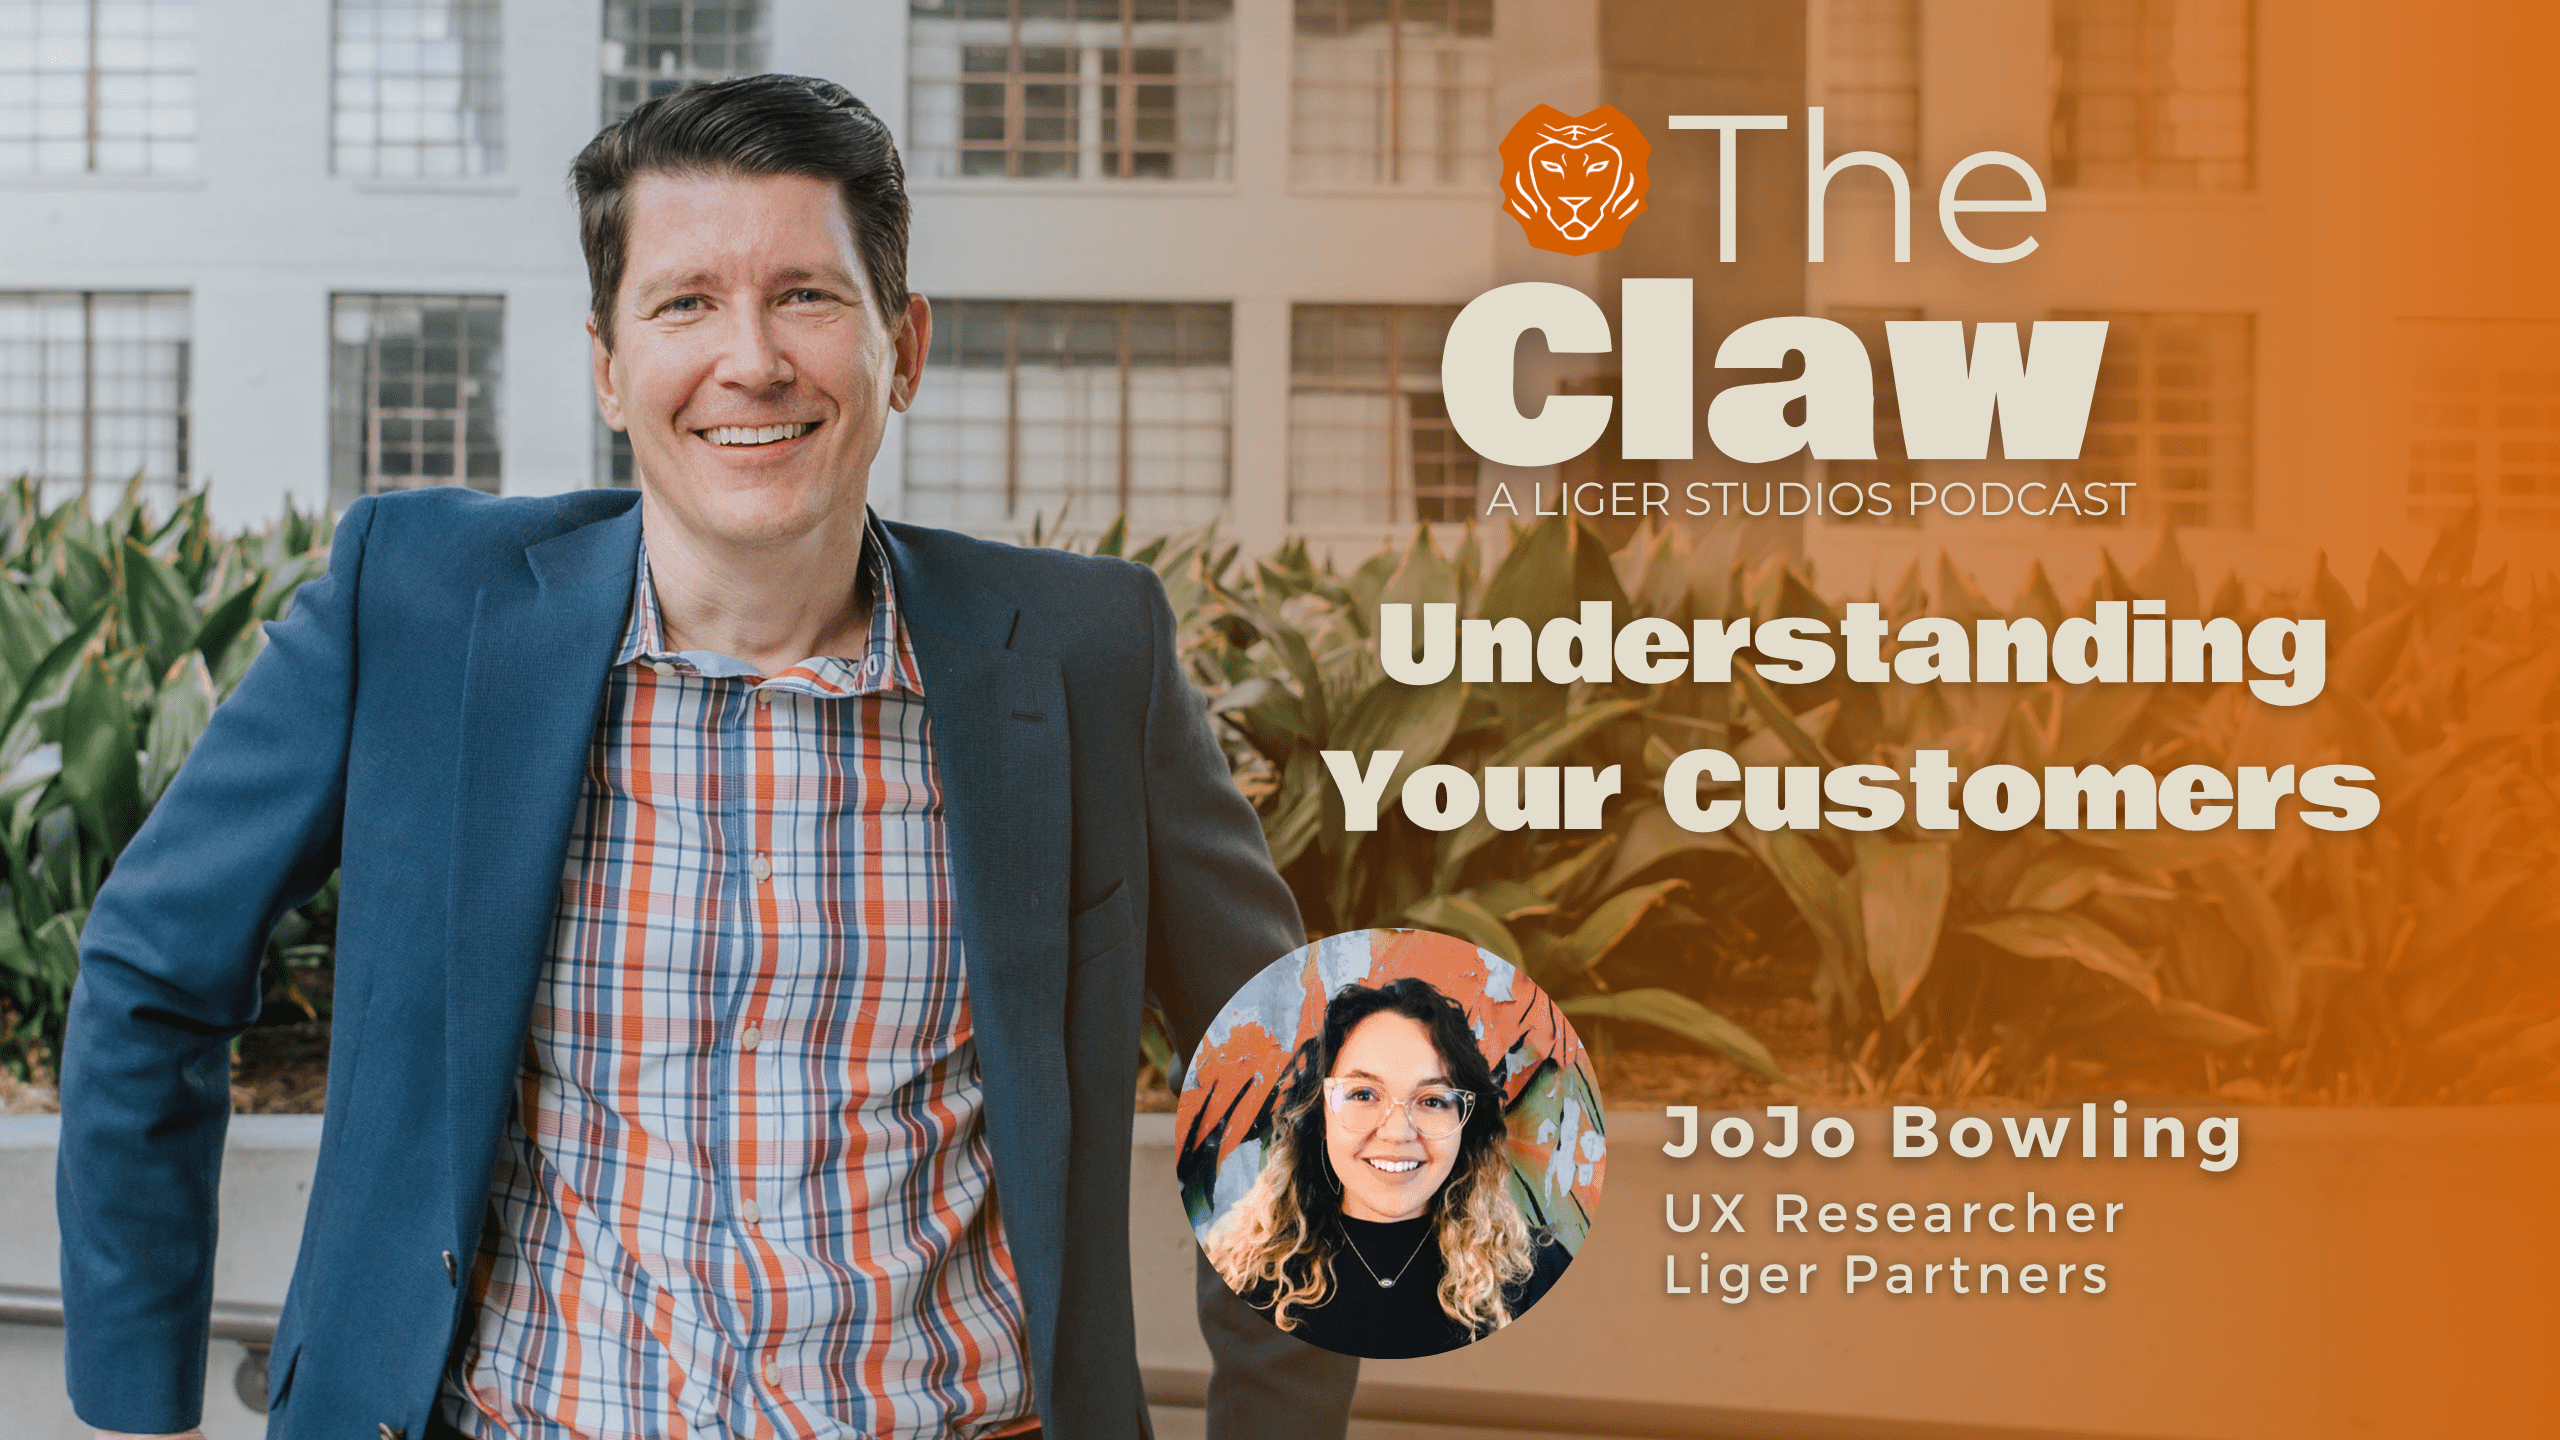 The Claw Podcast: Understanding Your Customers with JoJo Bowling